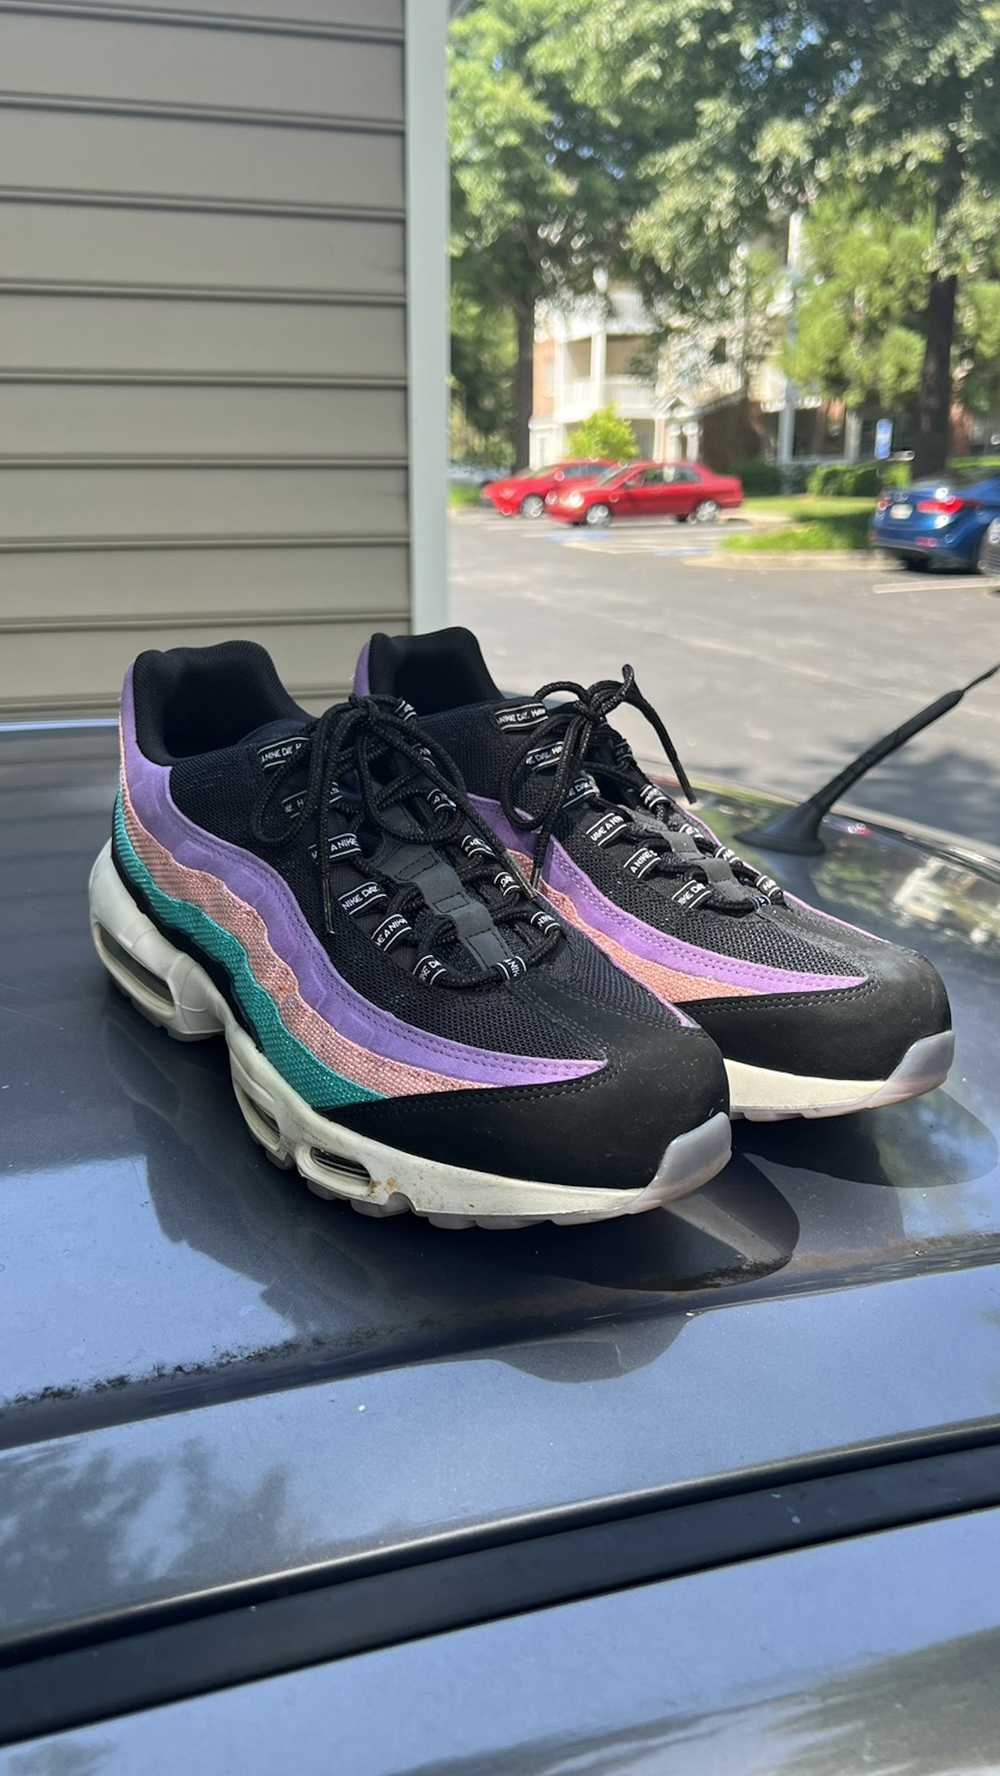 Nike × Streetwear Air Max 95 Have A Nike Day 2019 - image 3